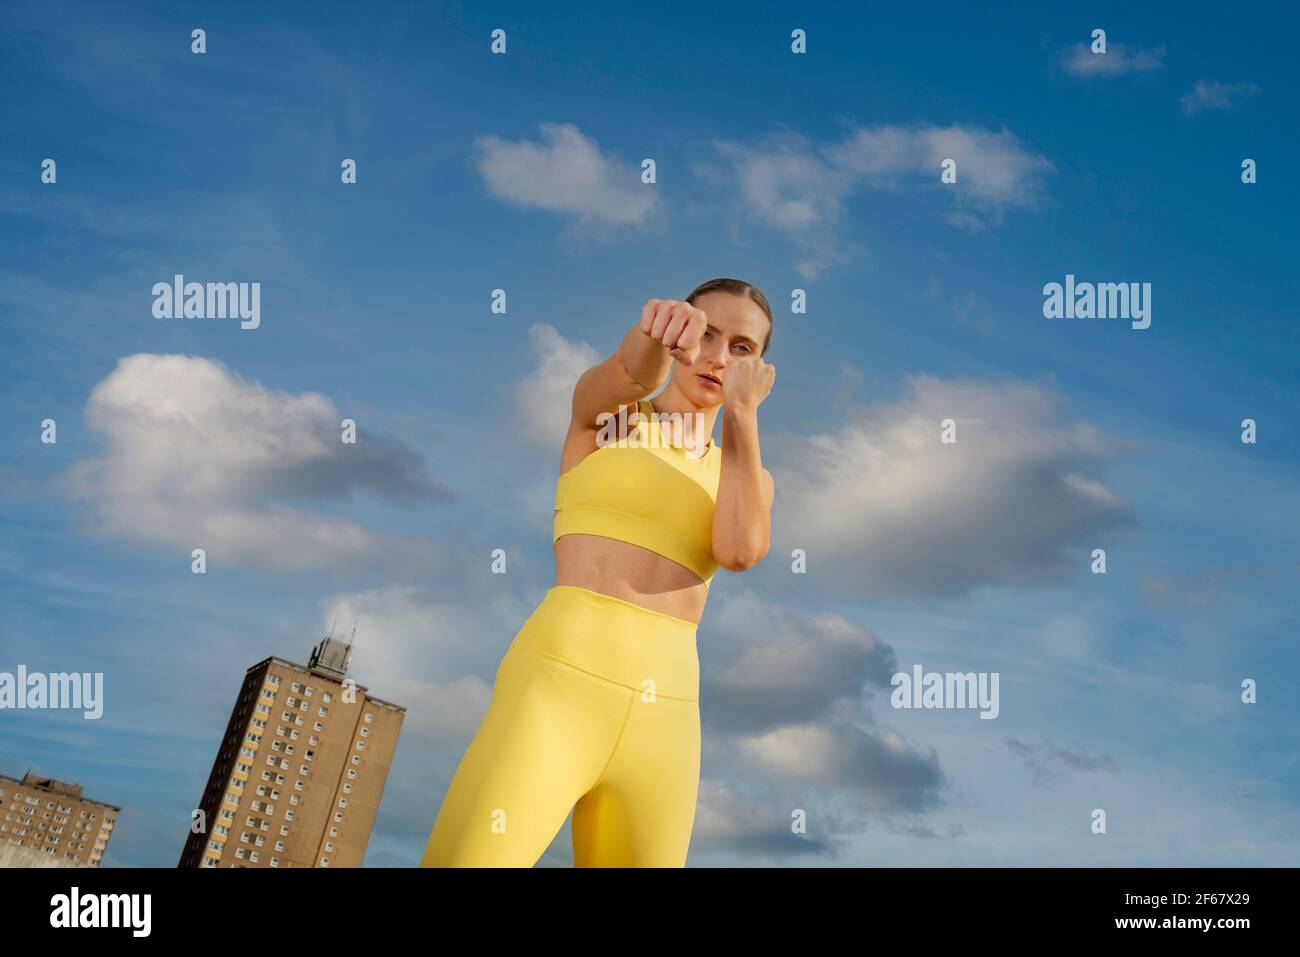 Woman wearing yellow activewear exercising ouside in an urban setting, fists up in a boxing pose. Stock Photo